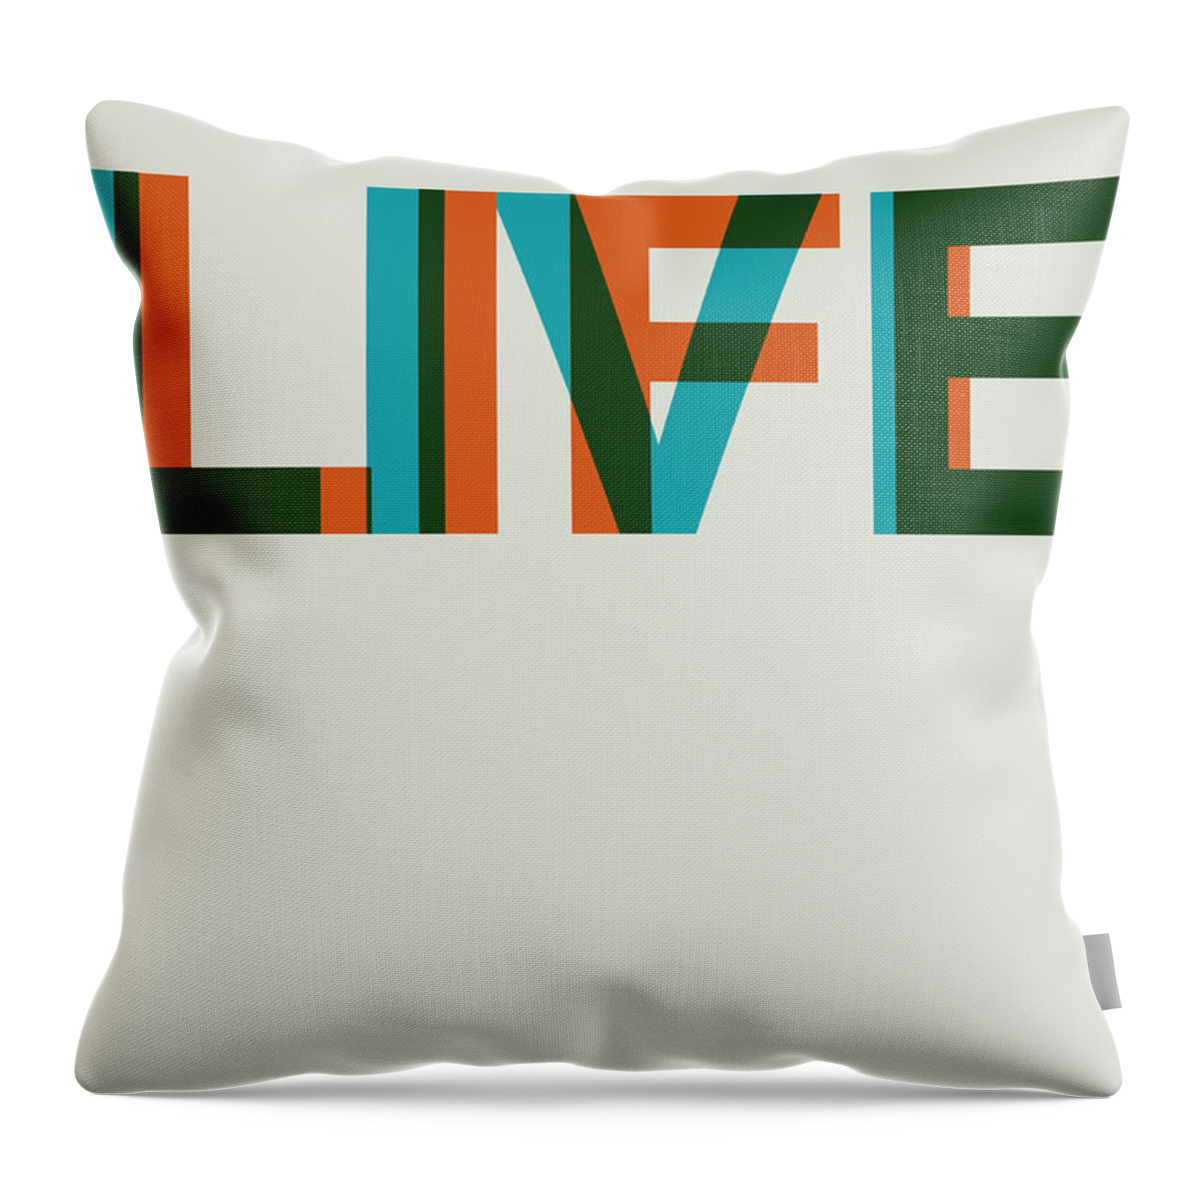 Quotes Throw Pillow featuring the digital art Live Life Poster 2 by Naxart Studio